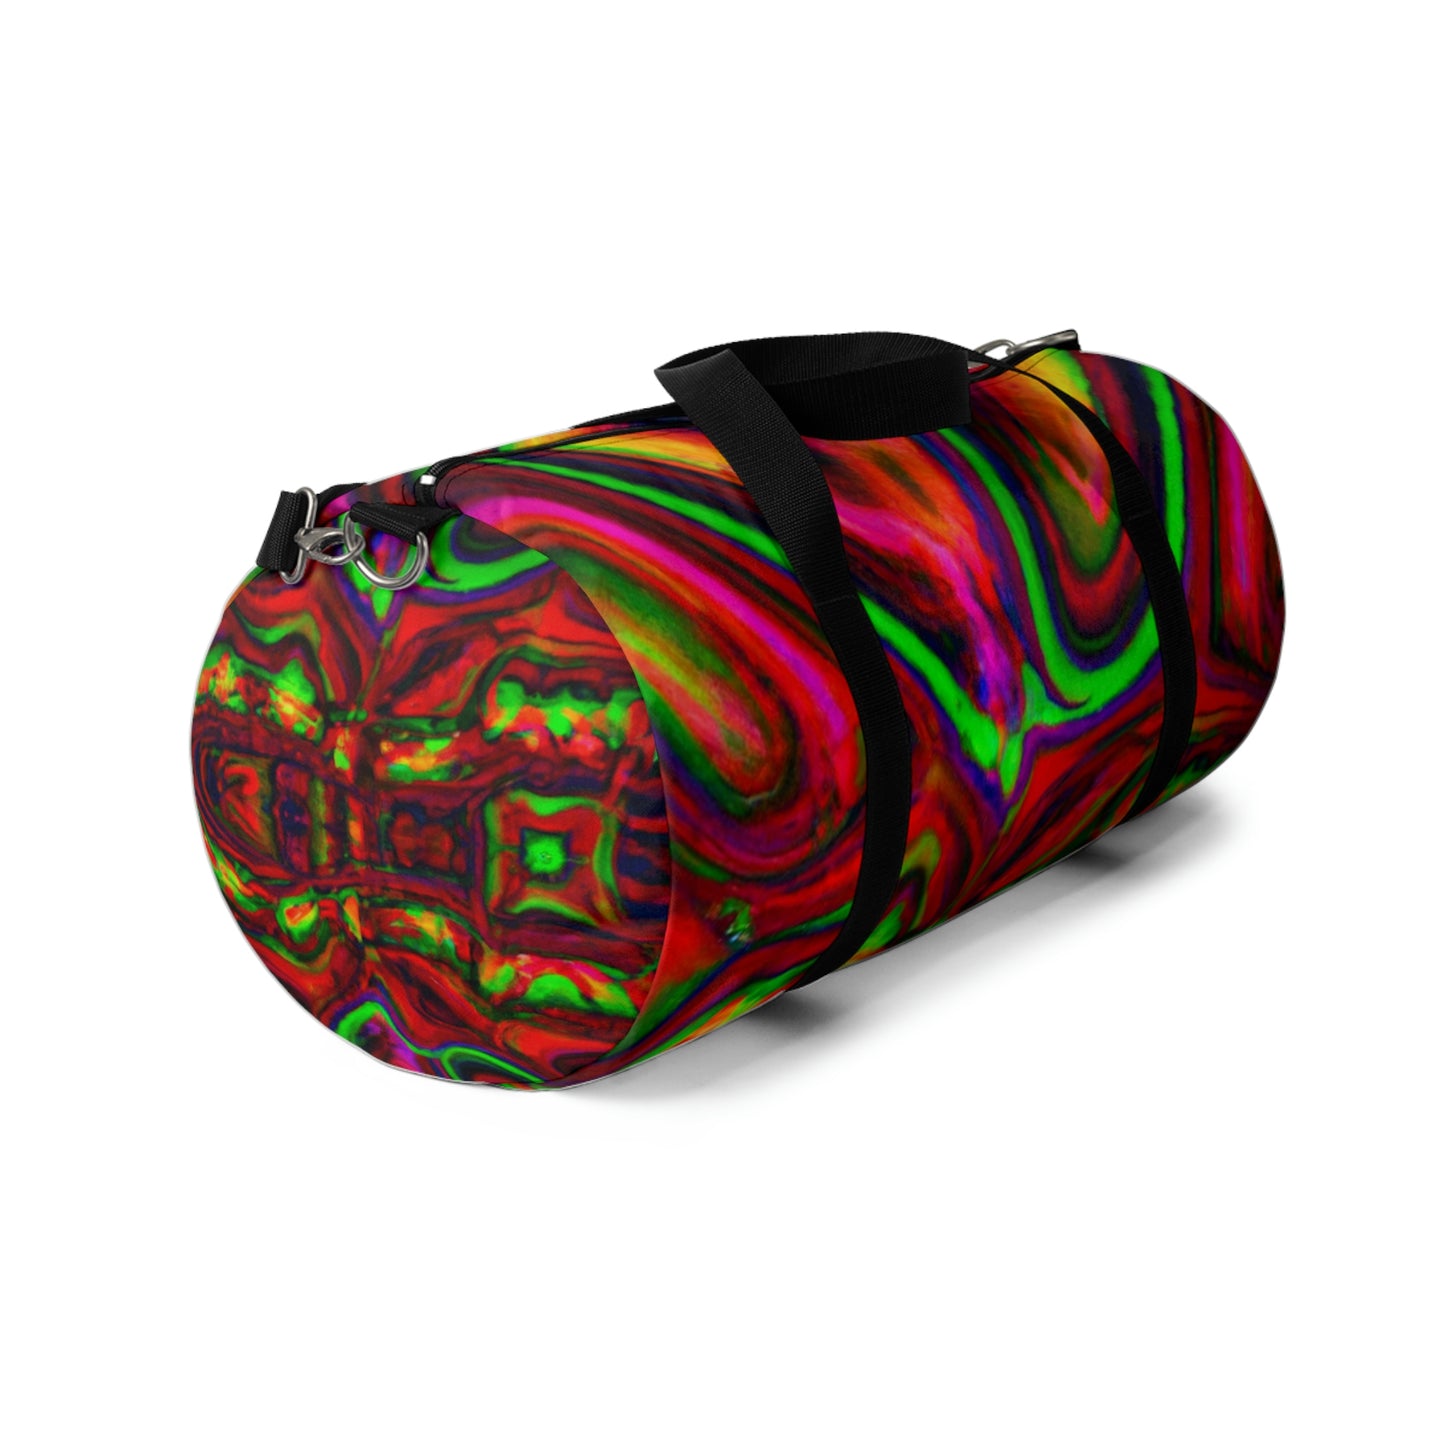 Valentino - Psychedelic Duffel Bag